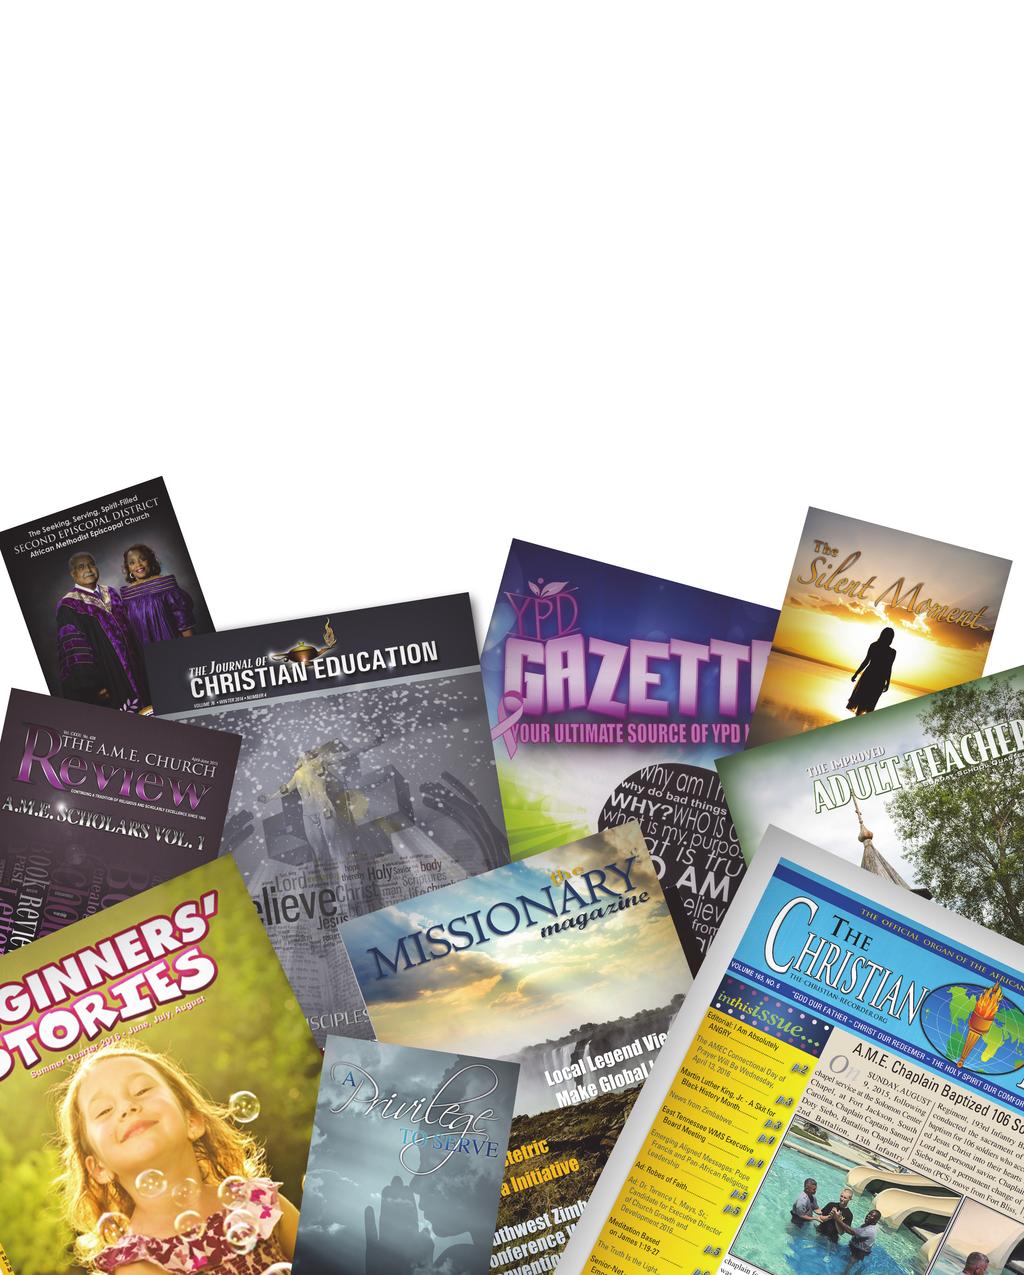 PUBLICATIONS The AMEC Sunday School Union is proud to print Connectional publications including The Christian Recorder, The AME Church Review, The Secret Chamber, The Missionary Magazine, The YPD